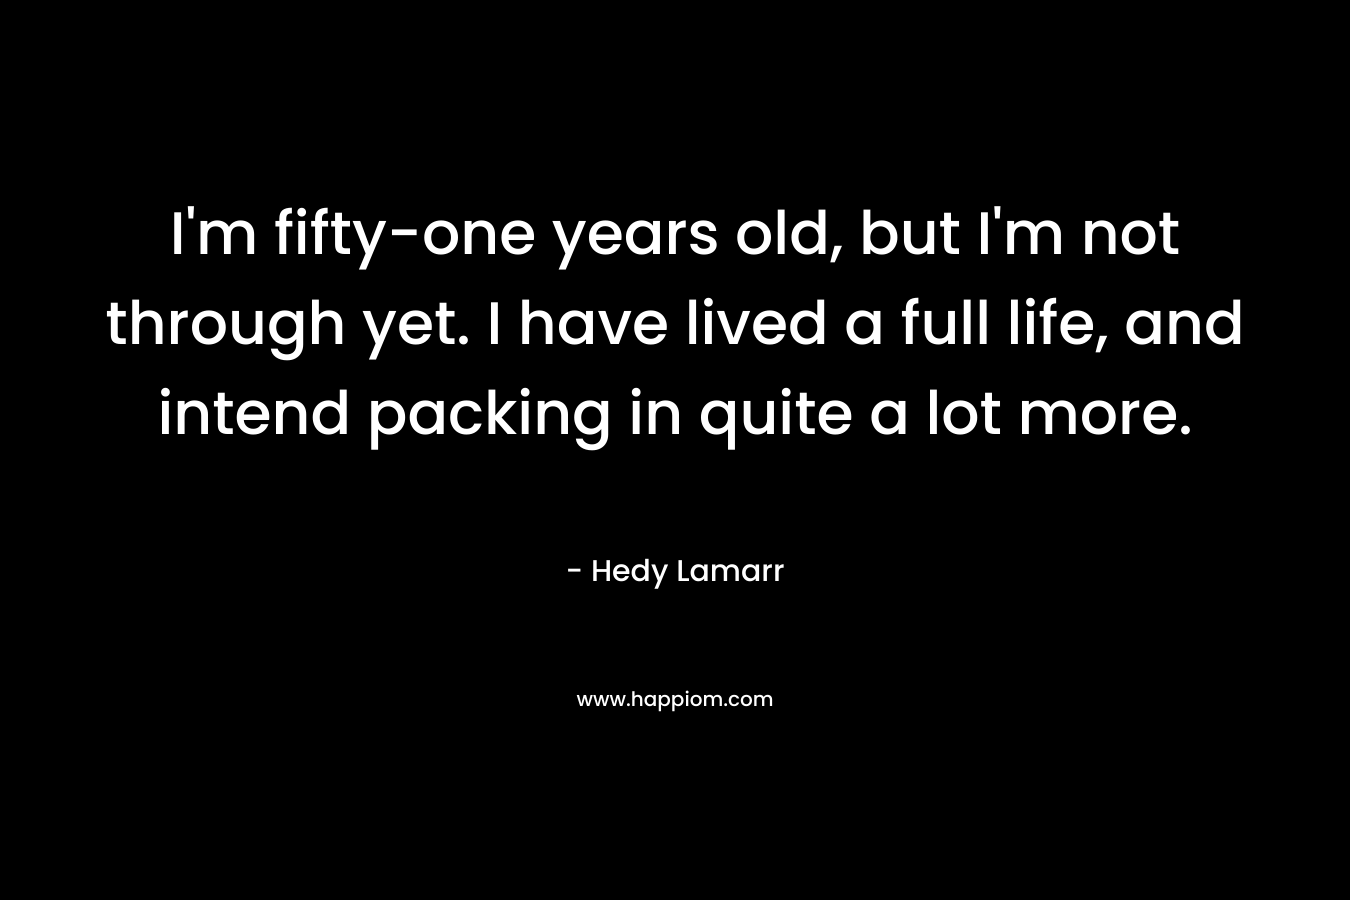 I’m fifty-one years old, but I’m not through yet. I have lived a full life, and intend packing in quite a lot more. – Hedy Lamarr